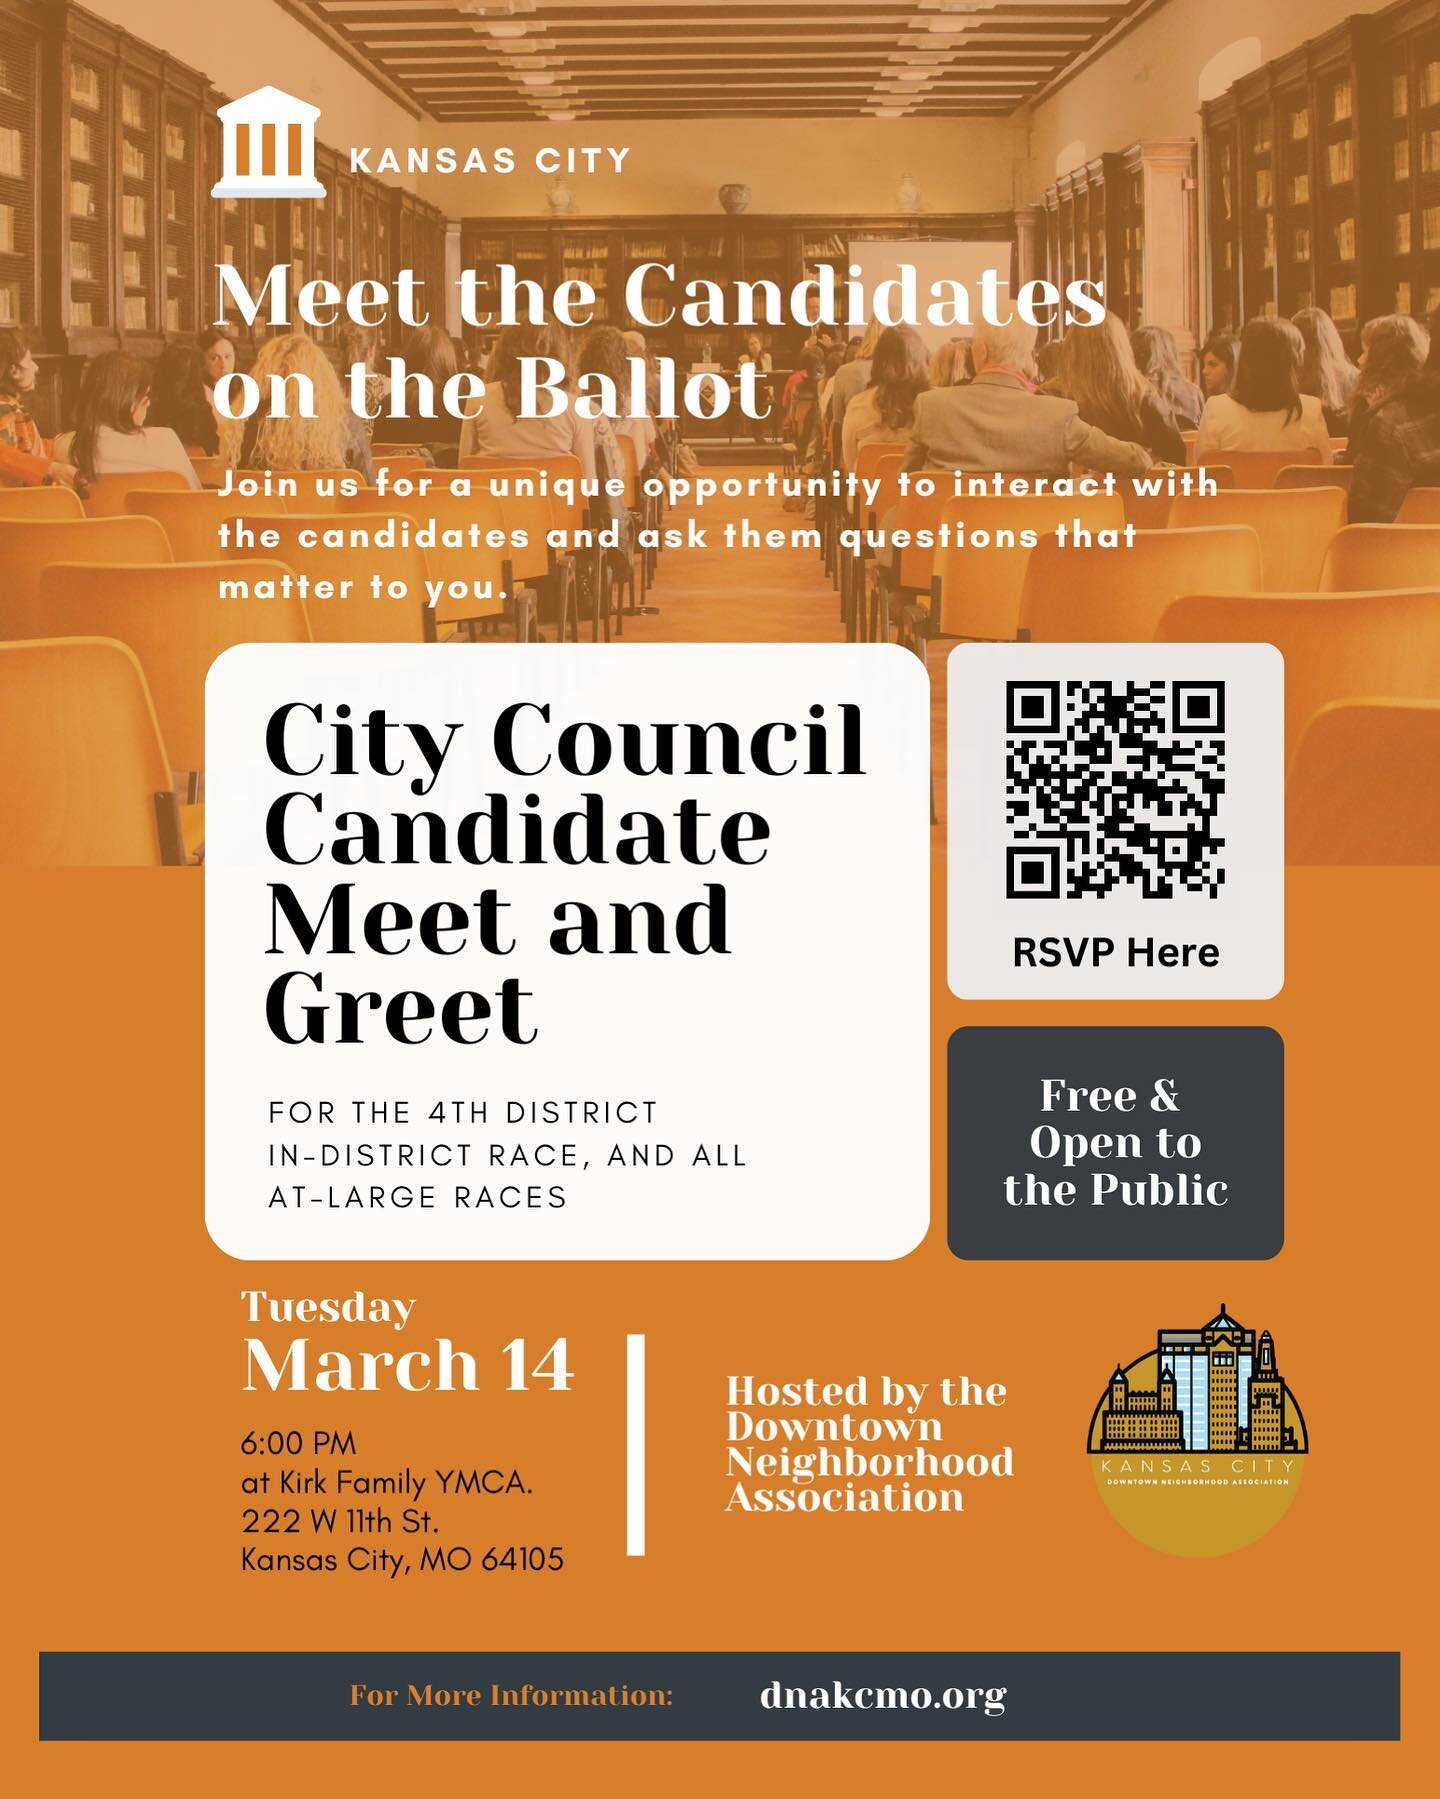 Join us on Tuesday to meet the candidates running for City Council on April 4. RSVP link in bio.